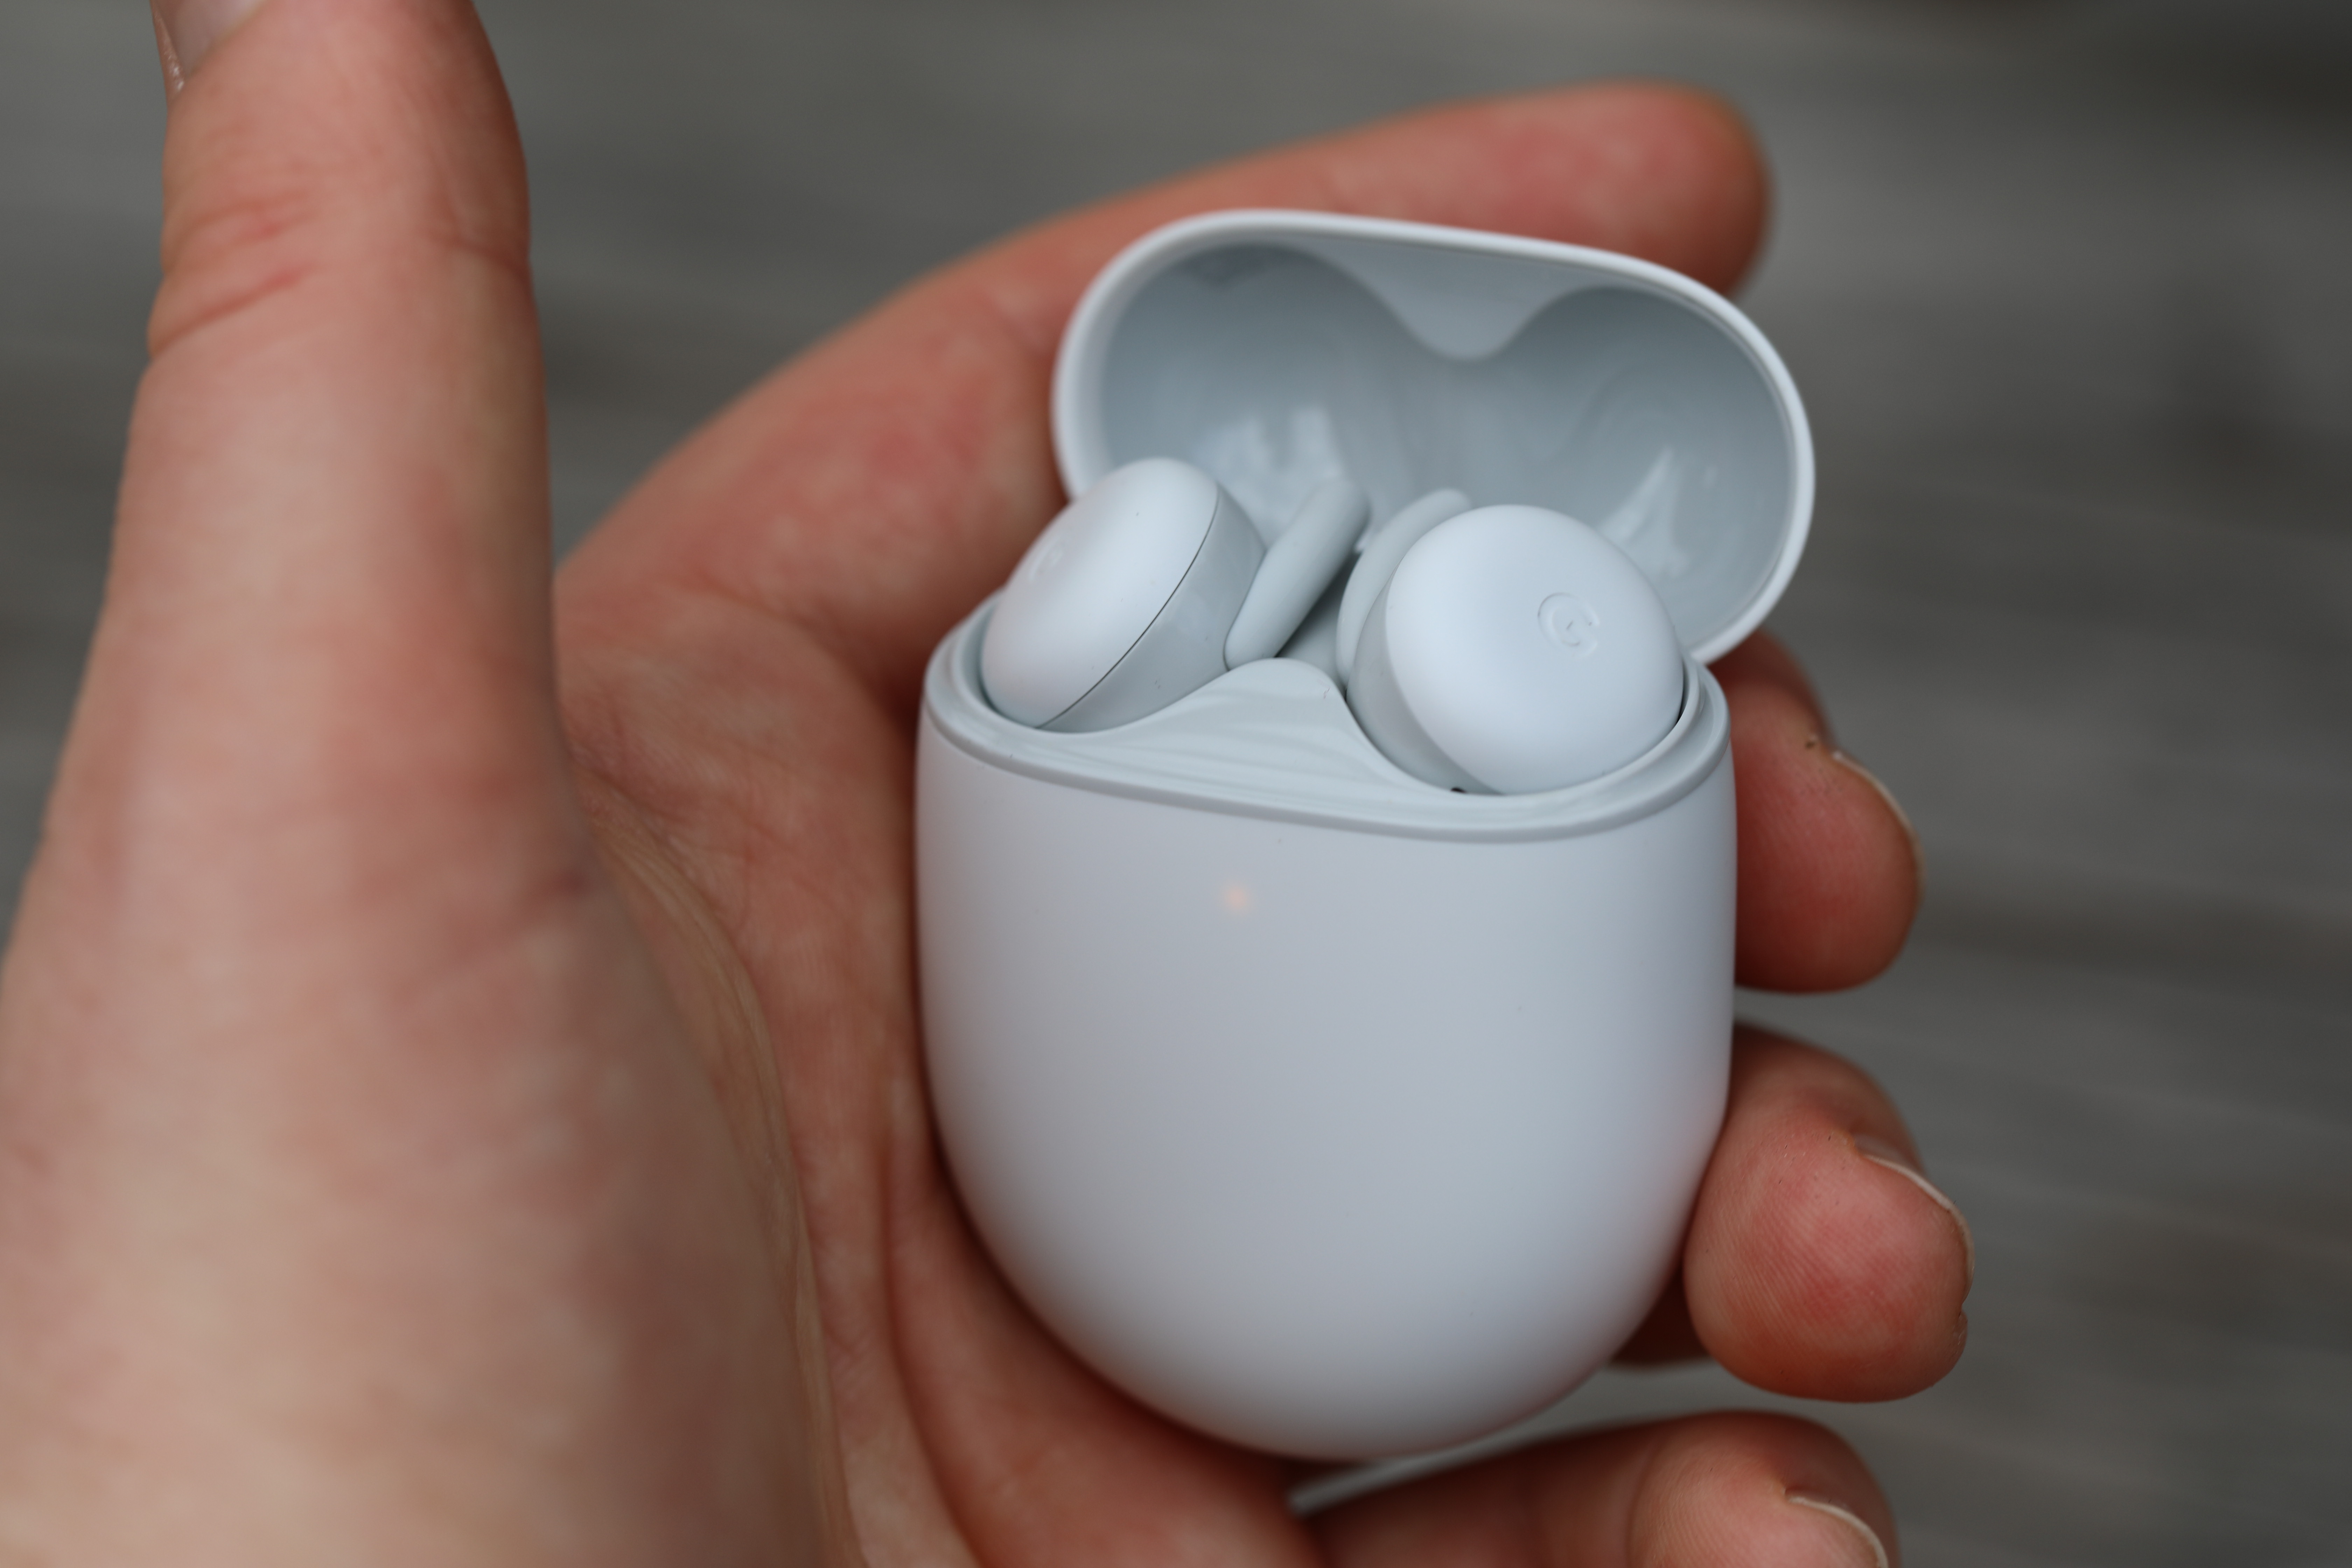 Google’s Pixel Buds A Series are an exercise in earbud cost cutting The budget headphones drop features to hit that $99 price point